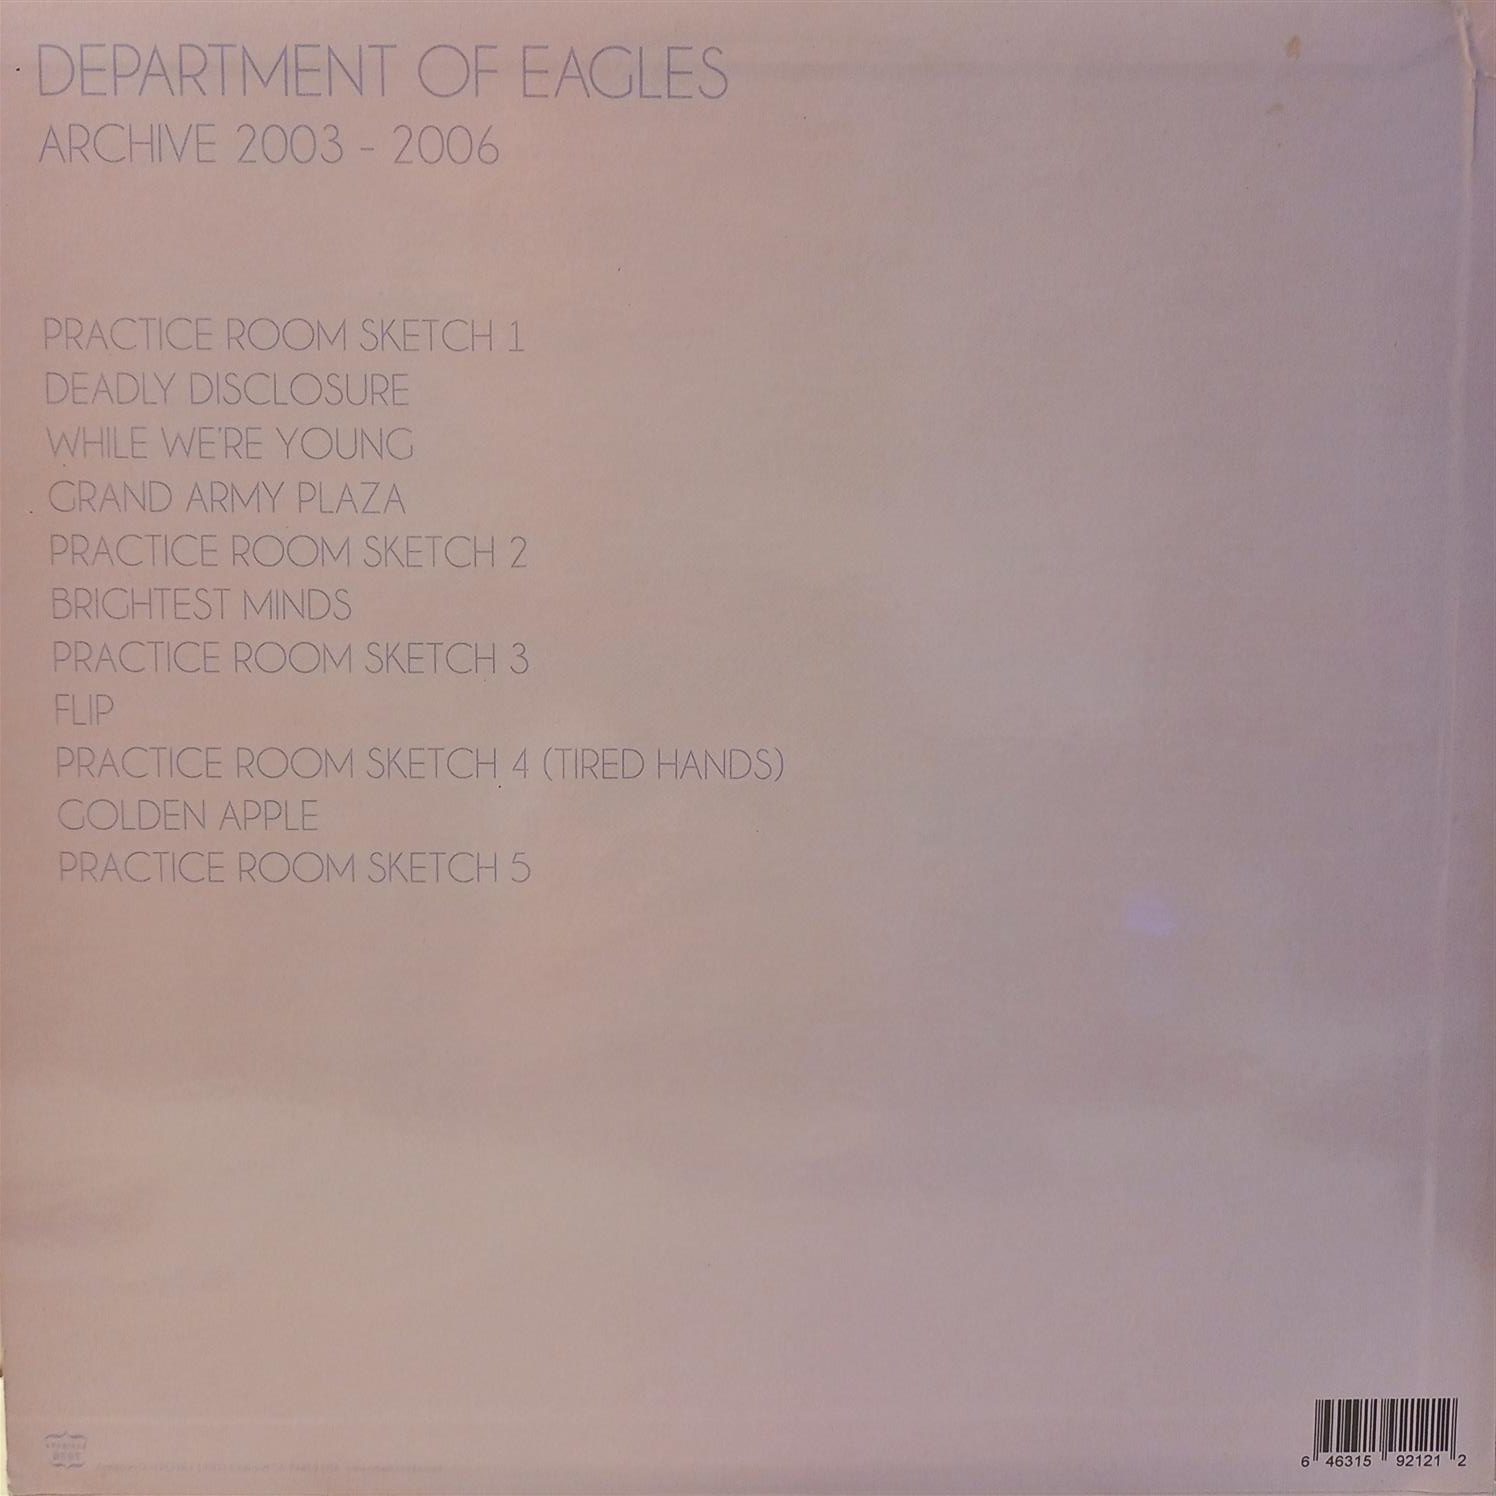 DEPARTMENT OF EAGLES – ARCHIVE 2003 – 2006 ARKA